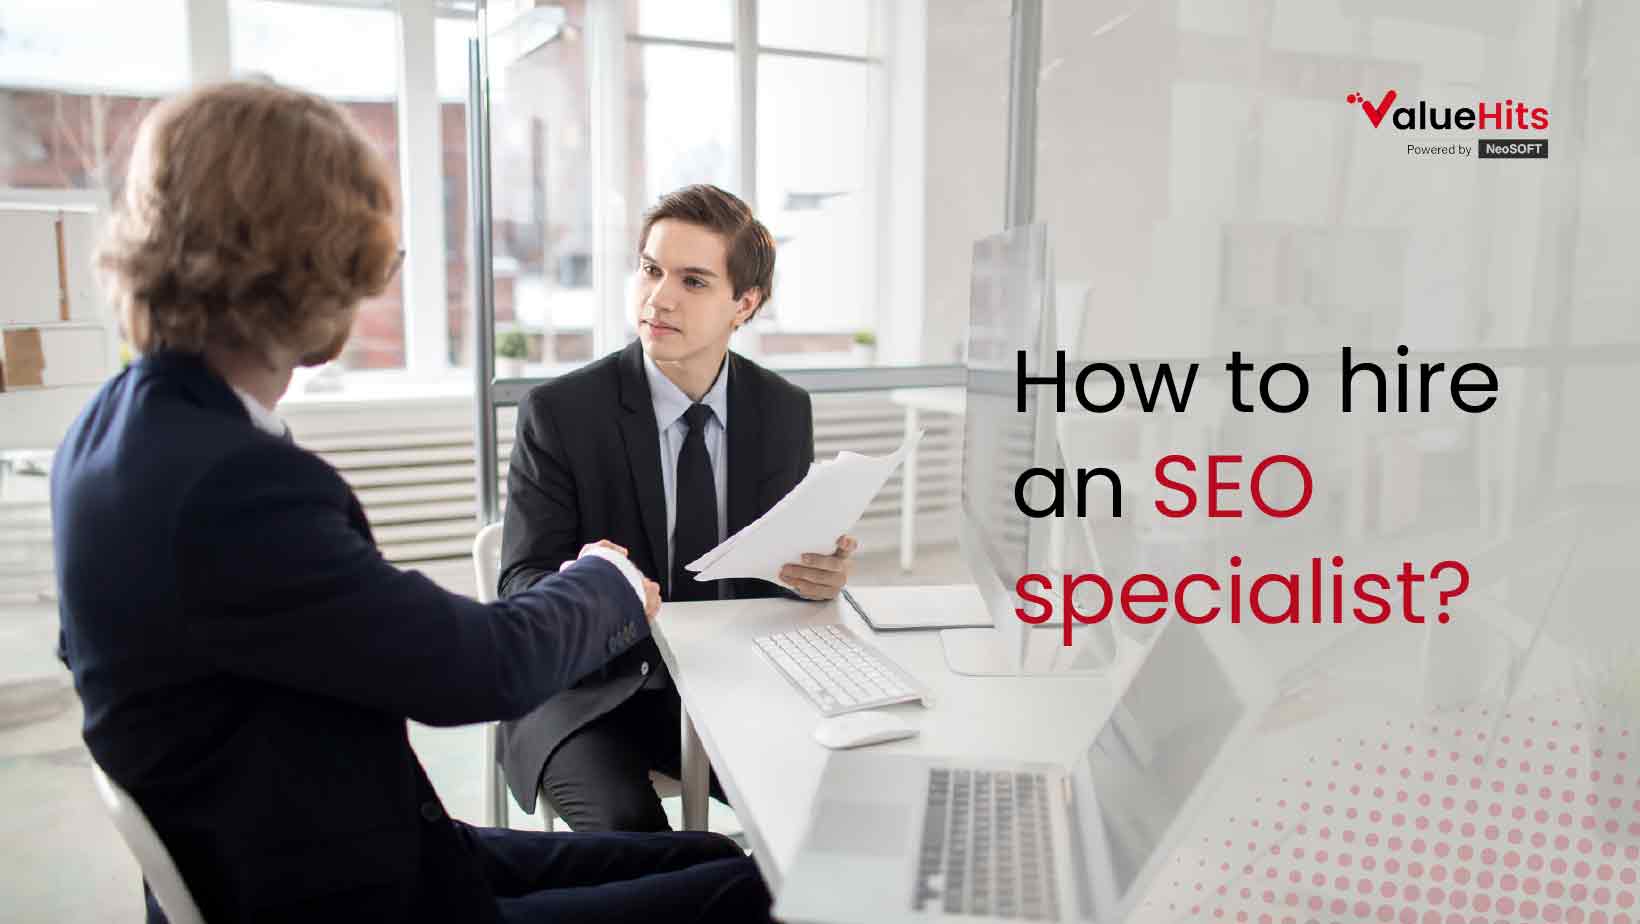 How to hire an SEO specialist